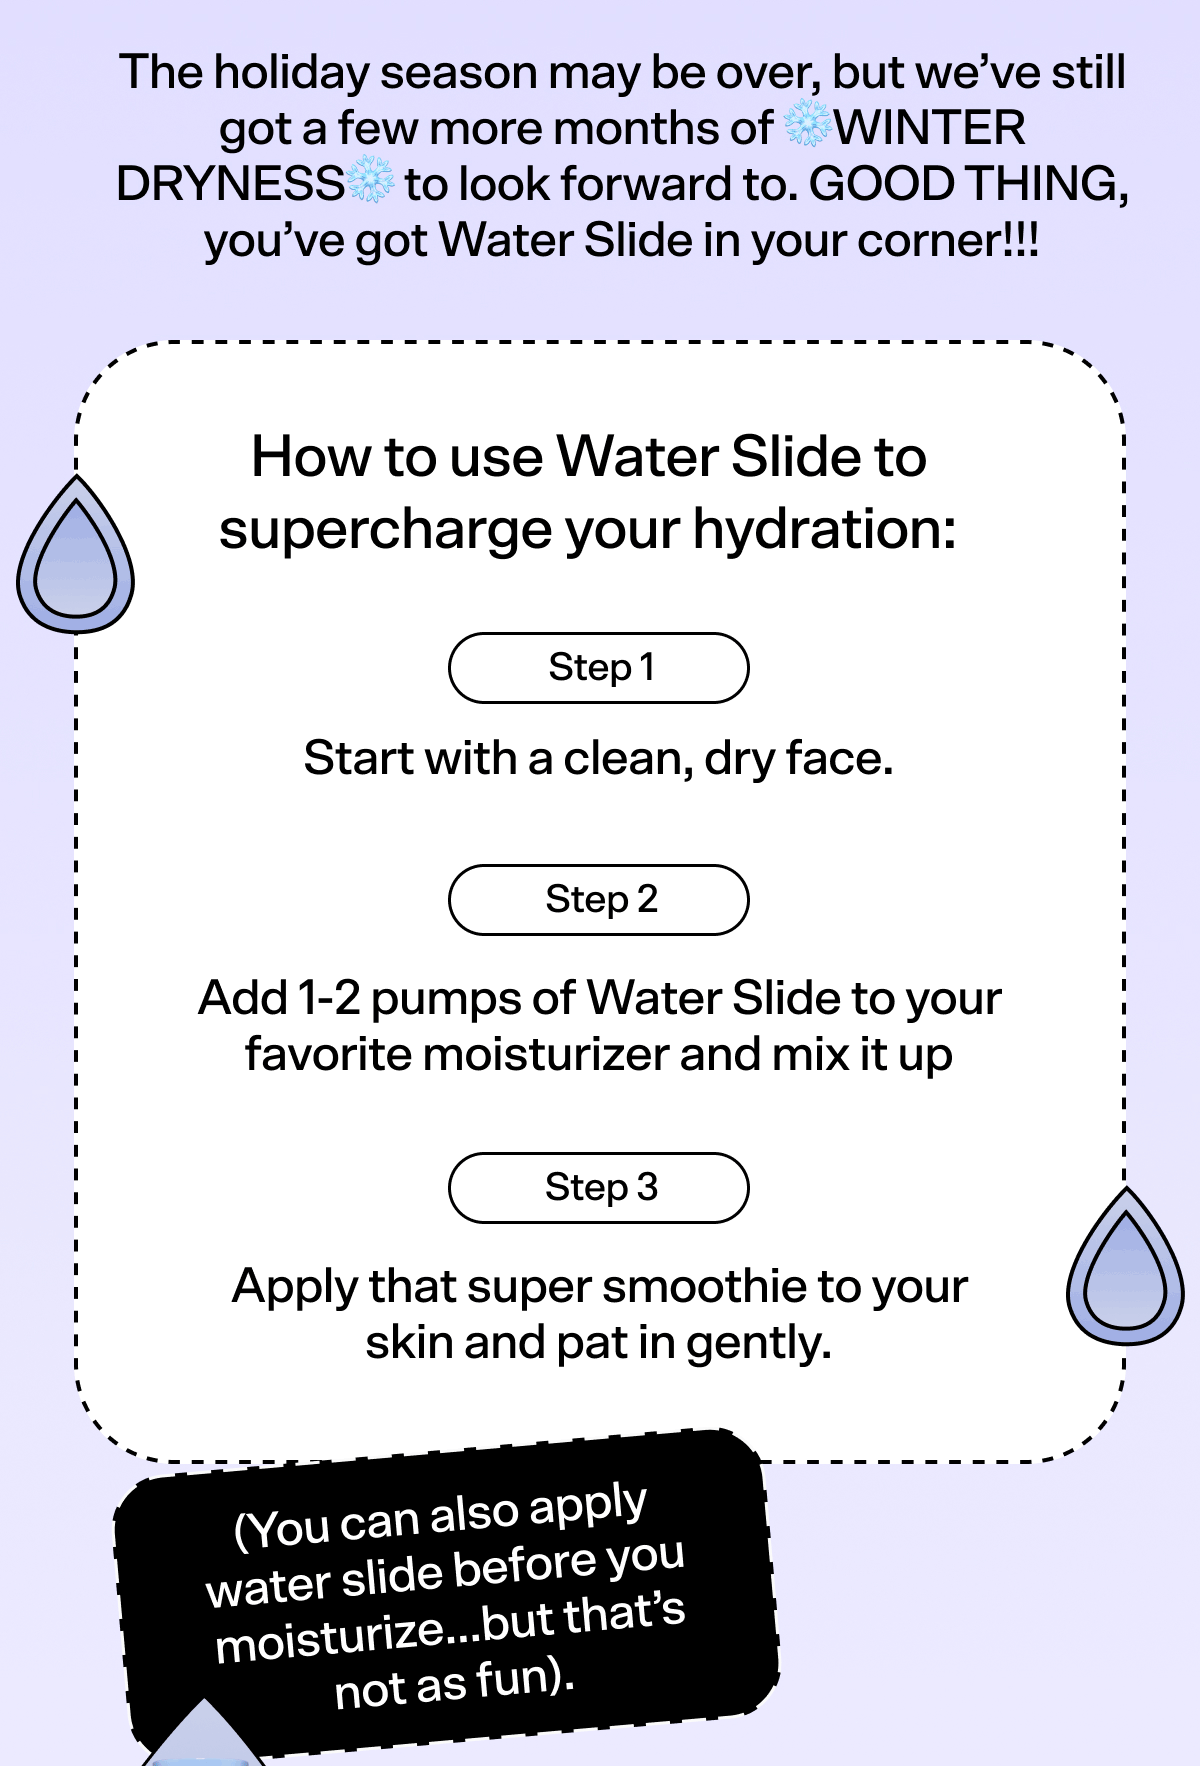 BODY The holiday season may be over, but we’ve still got a few more months of ❄️WINTER DRYNESS❄️ to look forward to. GOOD THING, you’ve got Water Slide in your corner!!! How to use Water Slide to supercharge your hydration: Step 1: Start with a clean, dry face. Step 2: Add 1-2 pumps of Water Slide to your favorite moisturizer and mix it up Step 3: Apply that super smoothie to your skin and pat in gently. (You can also apply water slide before you moisturize…but that’s not as fun).